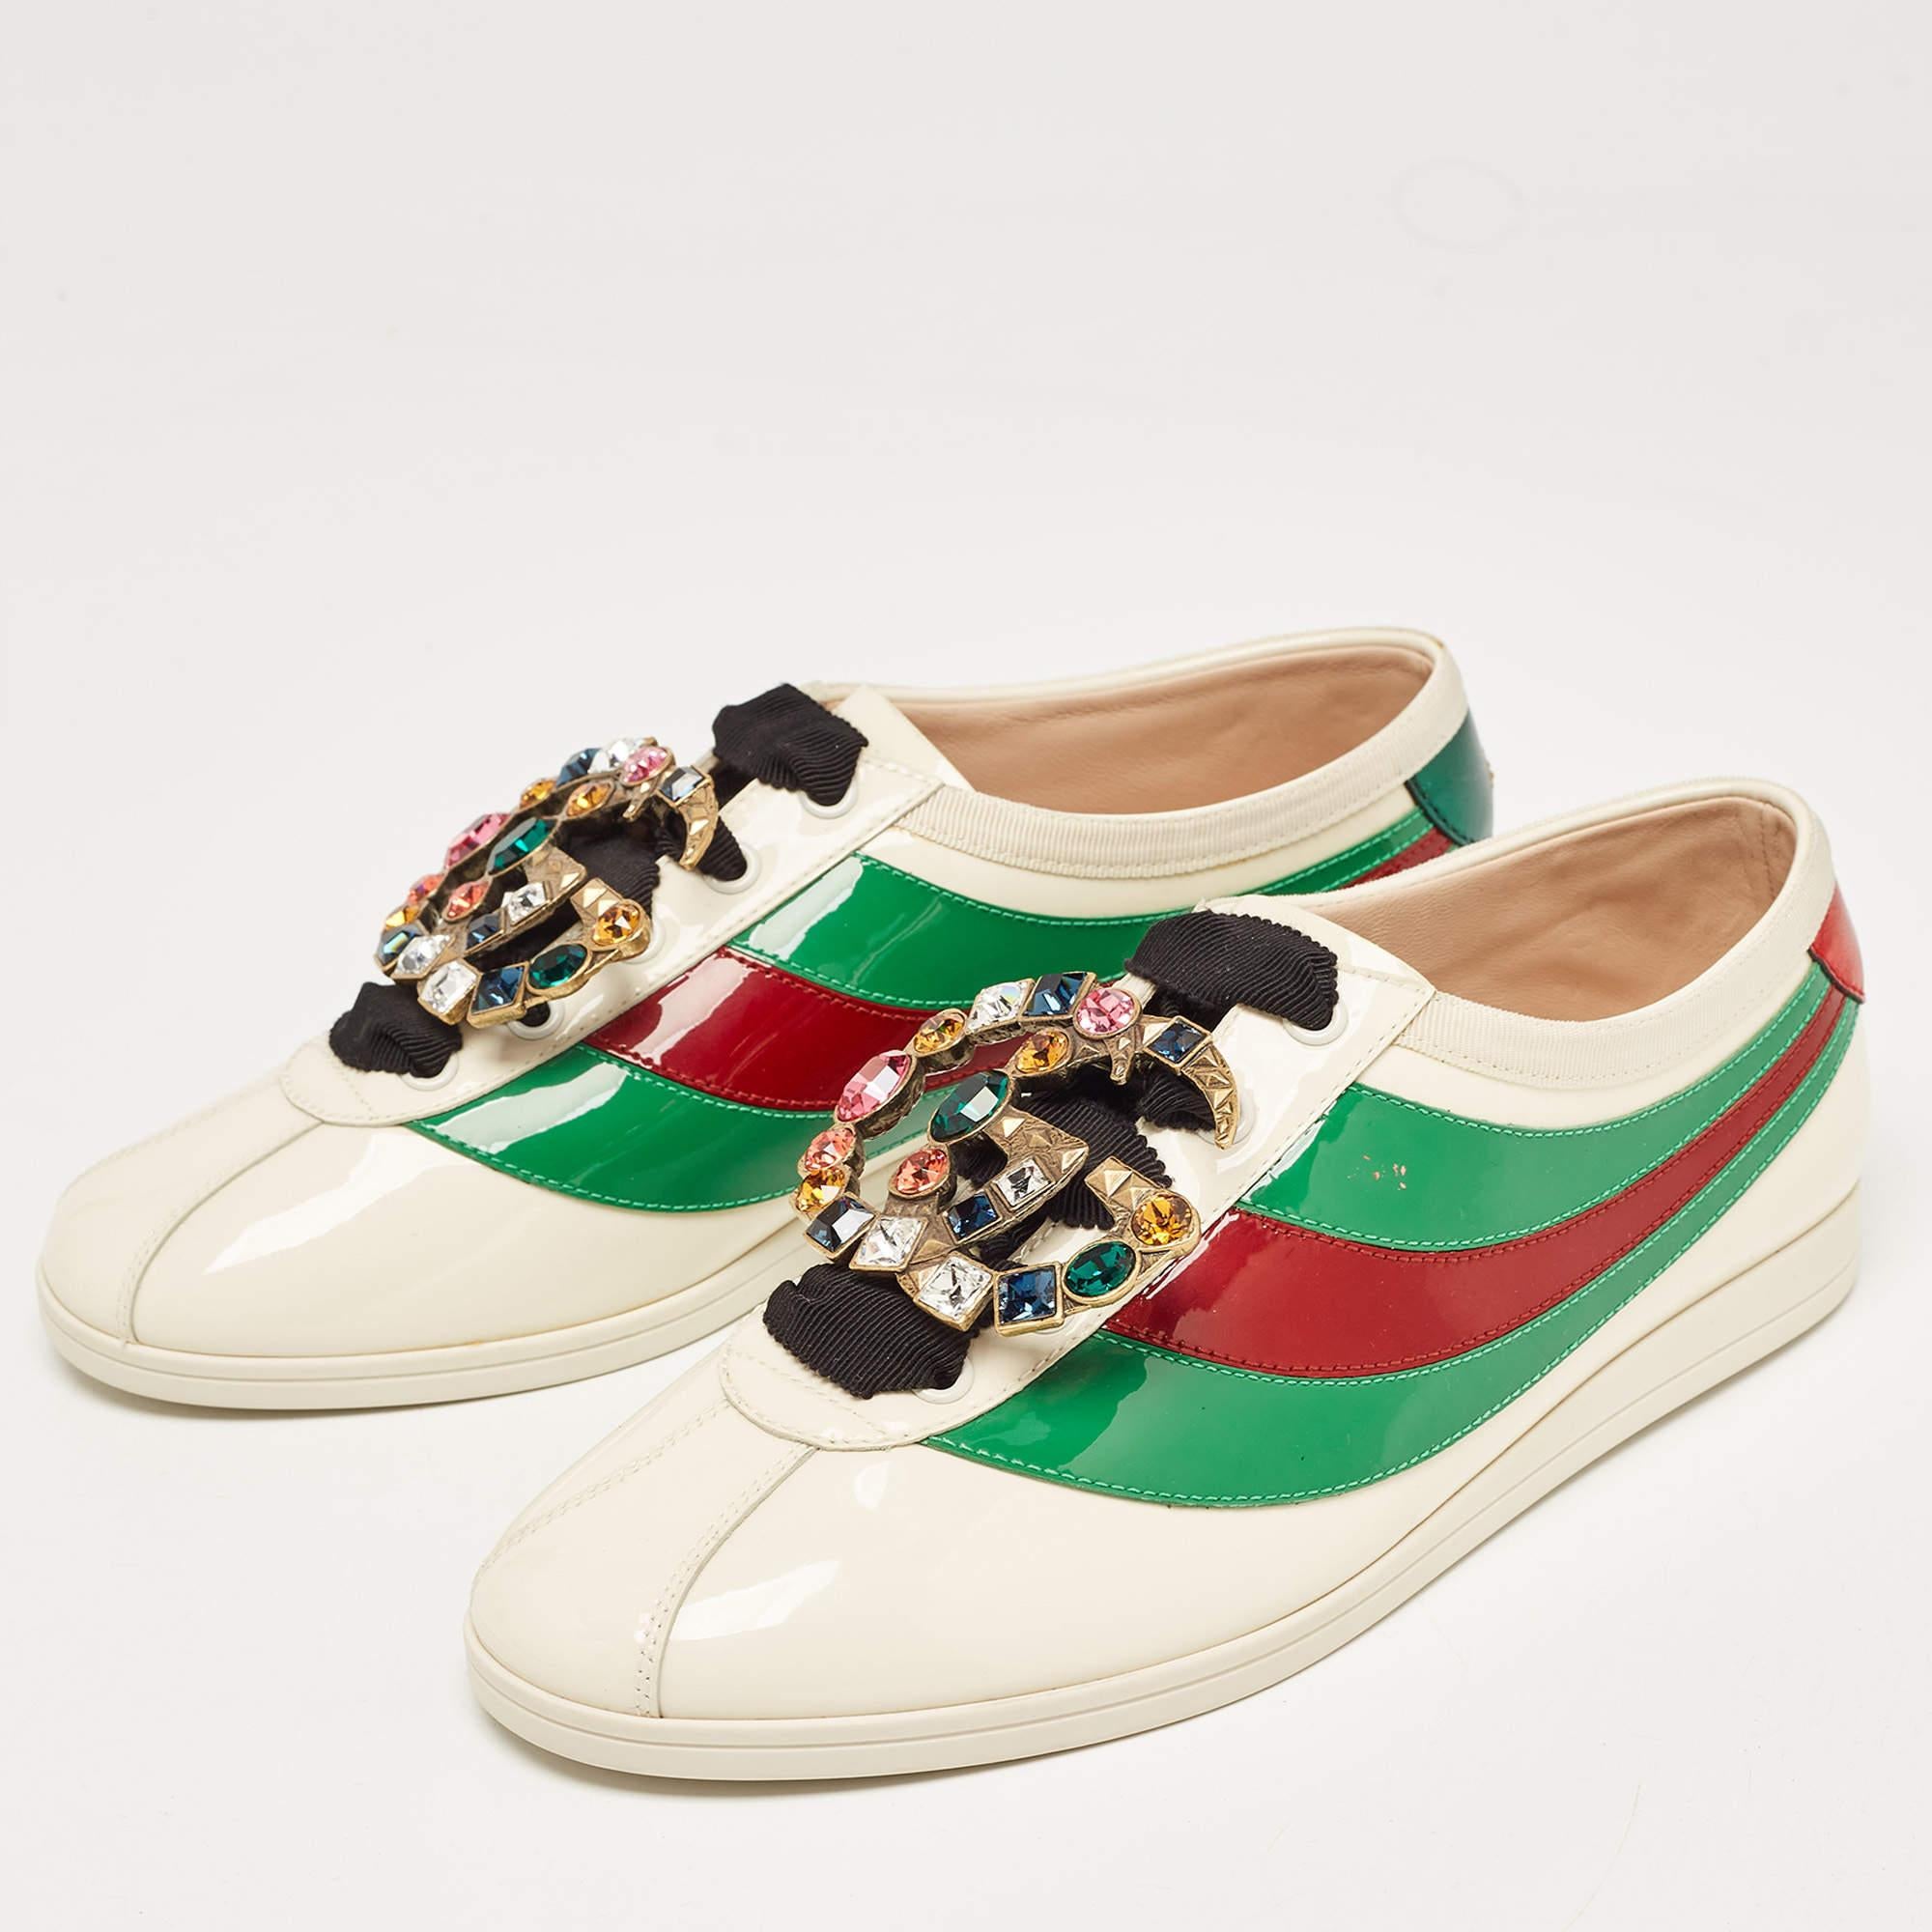 Gucci Tricolor Patent Falacer Crystal Embellished Low Top Sneakers Size 38 For Sale 4